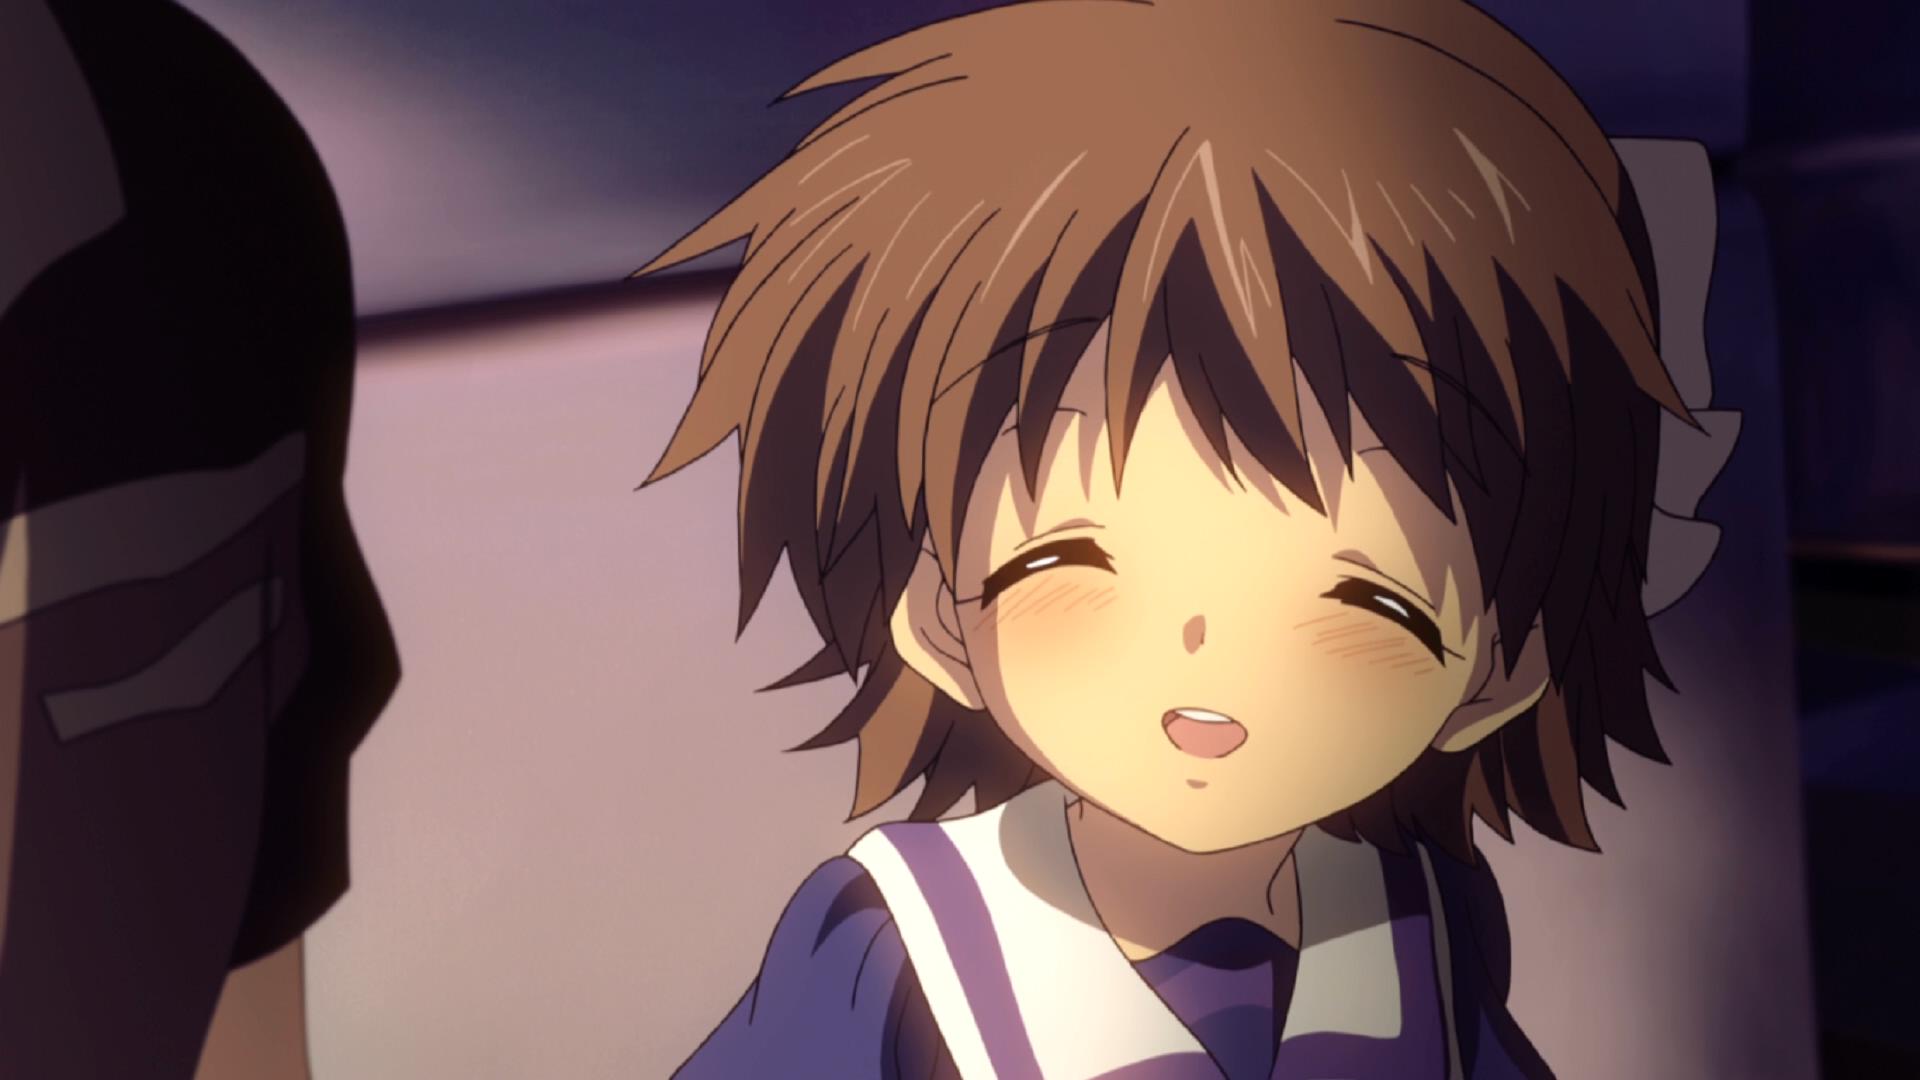 [QTS] CLANNAD ~After Story~ ep 18 (BD H264 1920x1080 24fps FLAC 5.1ch)_201224184639.jpg